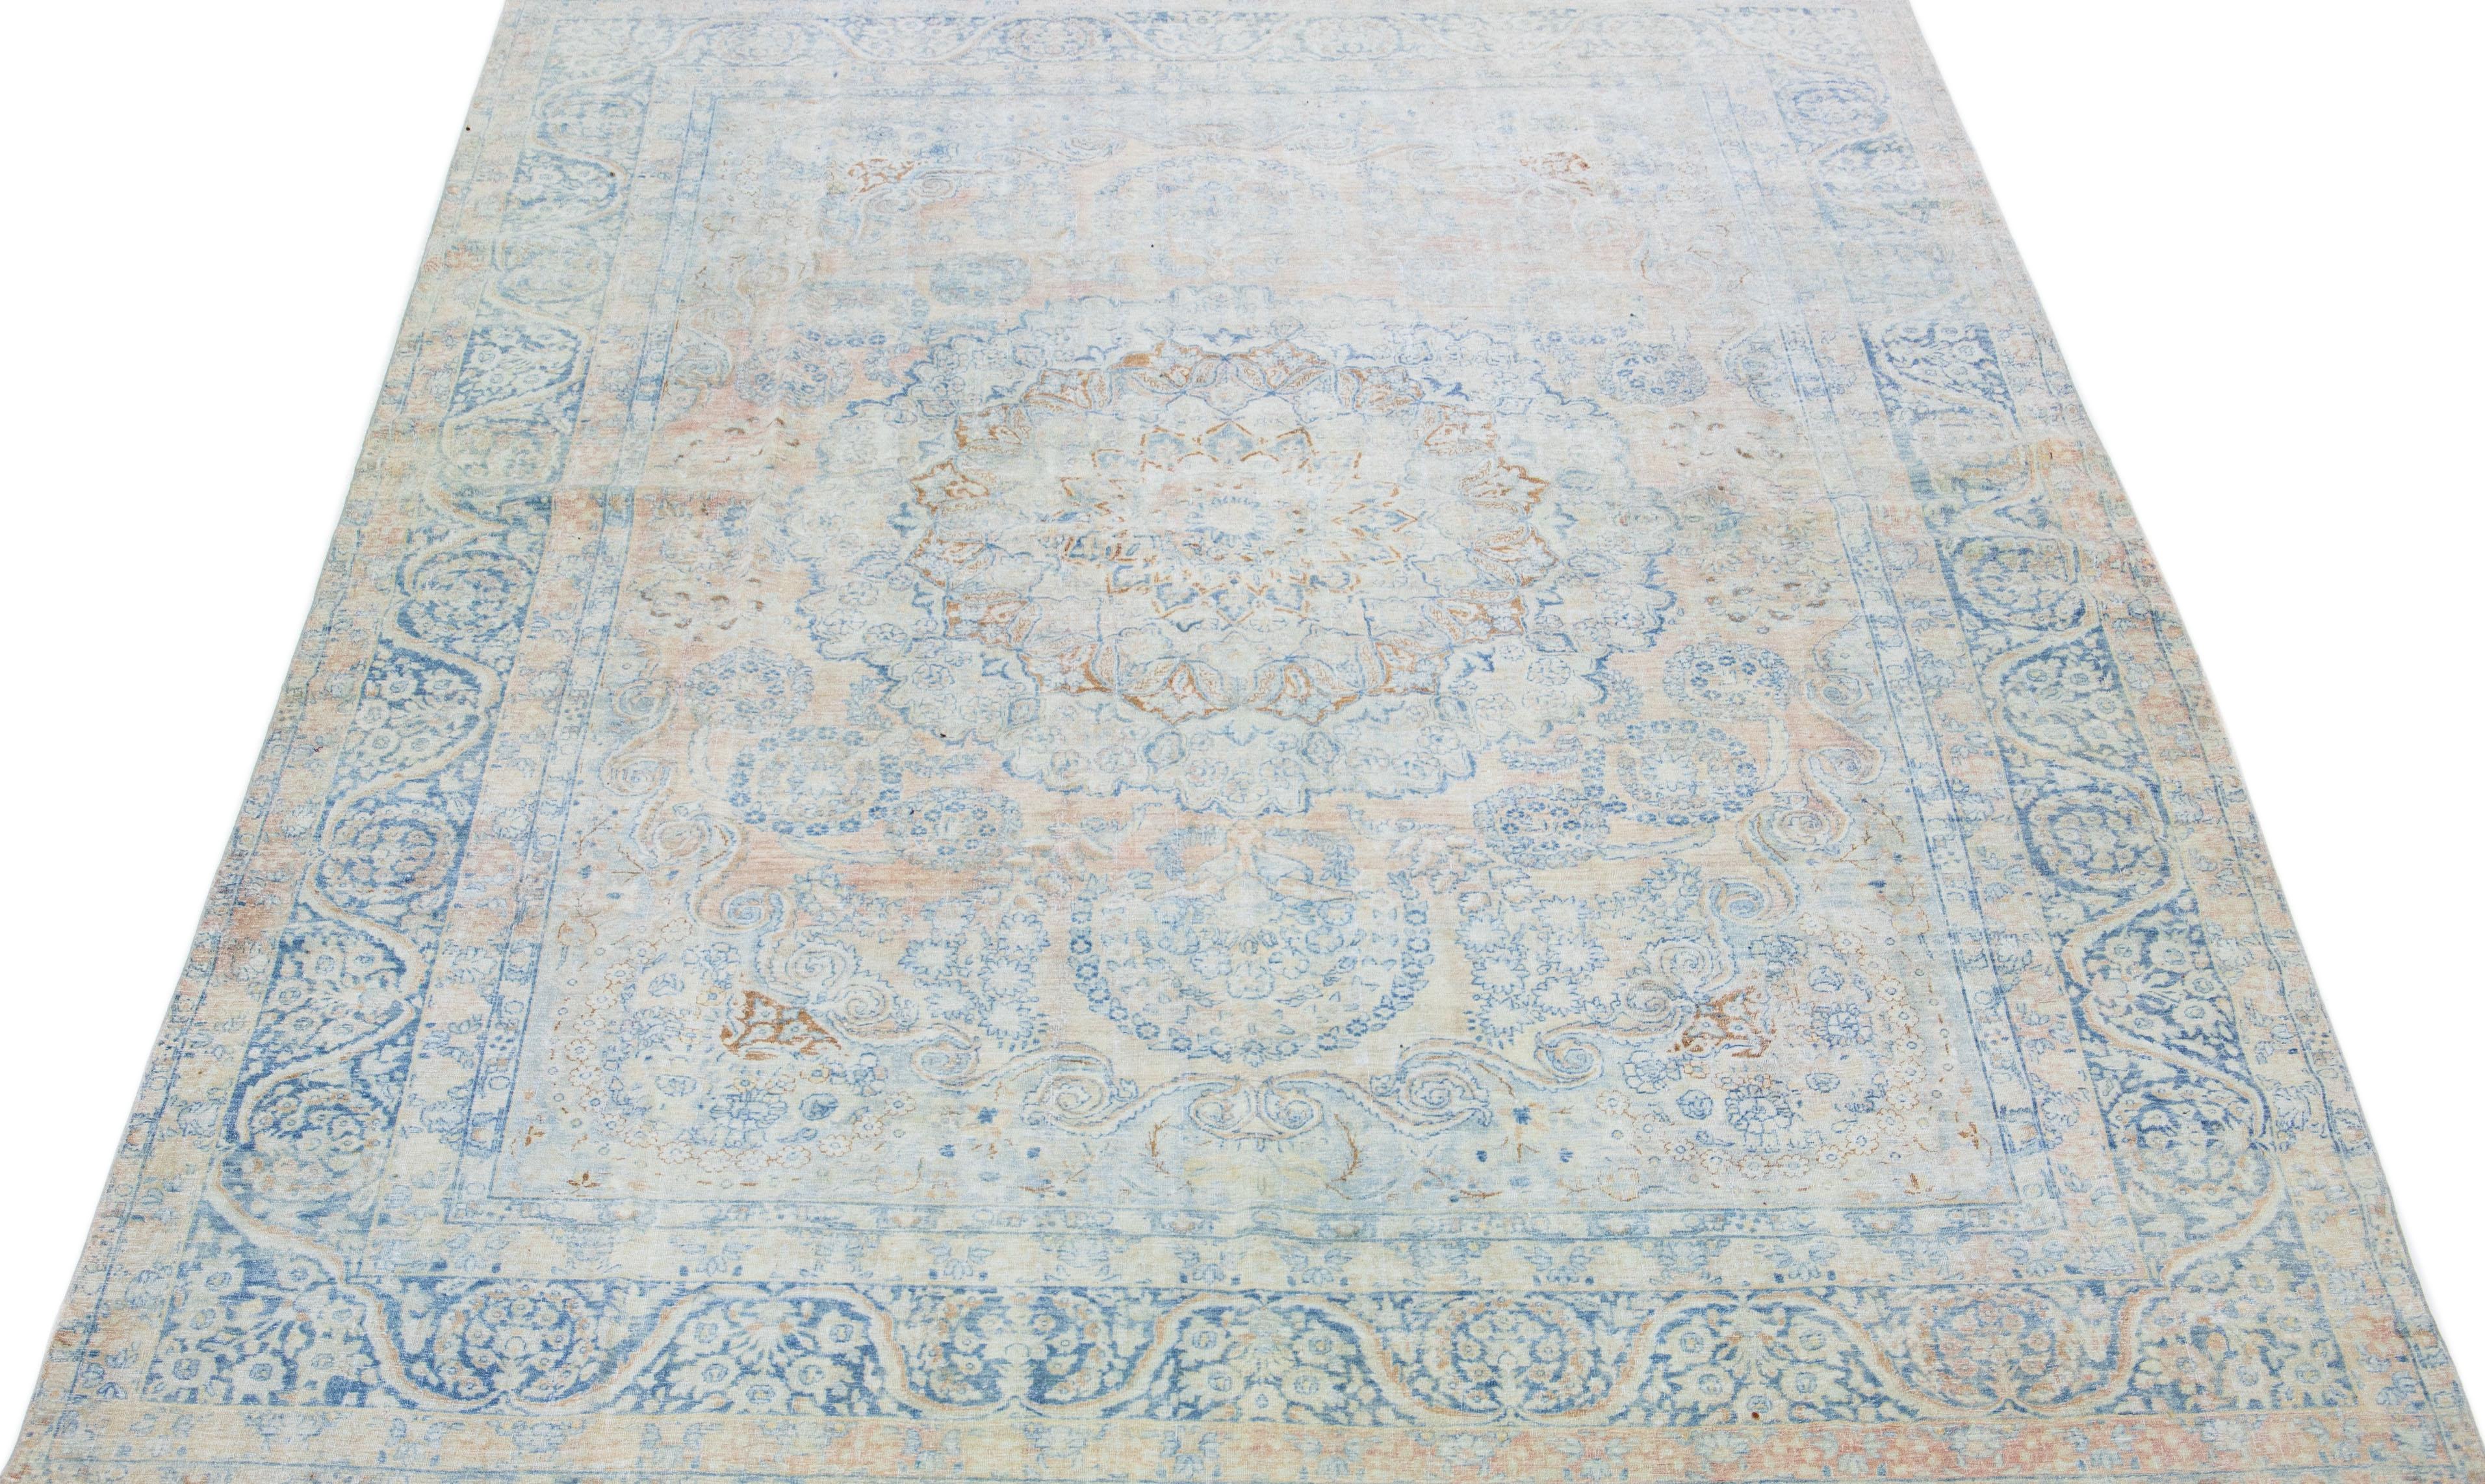 A beautiful Antique Mahal hand-knotted wool rug with a peach field. This Persian rug has blue and brown accents in an all-over rosette design.

This rug measures 10'2